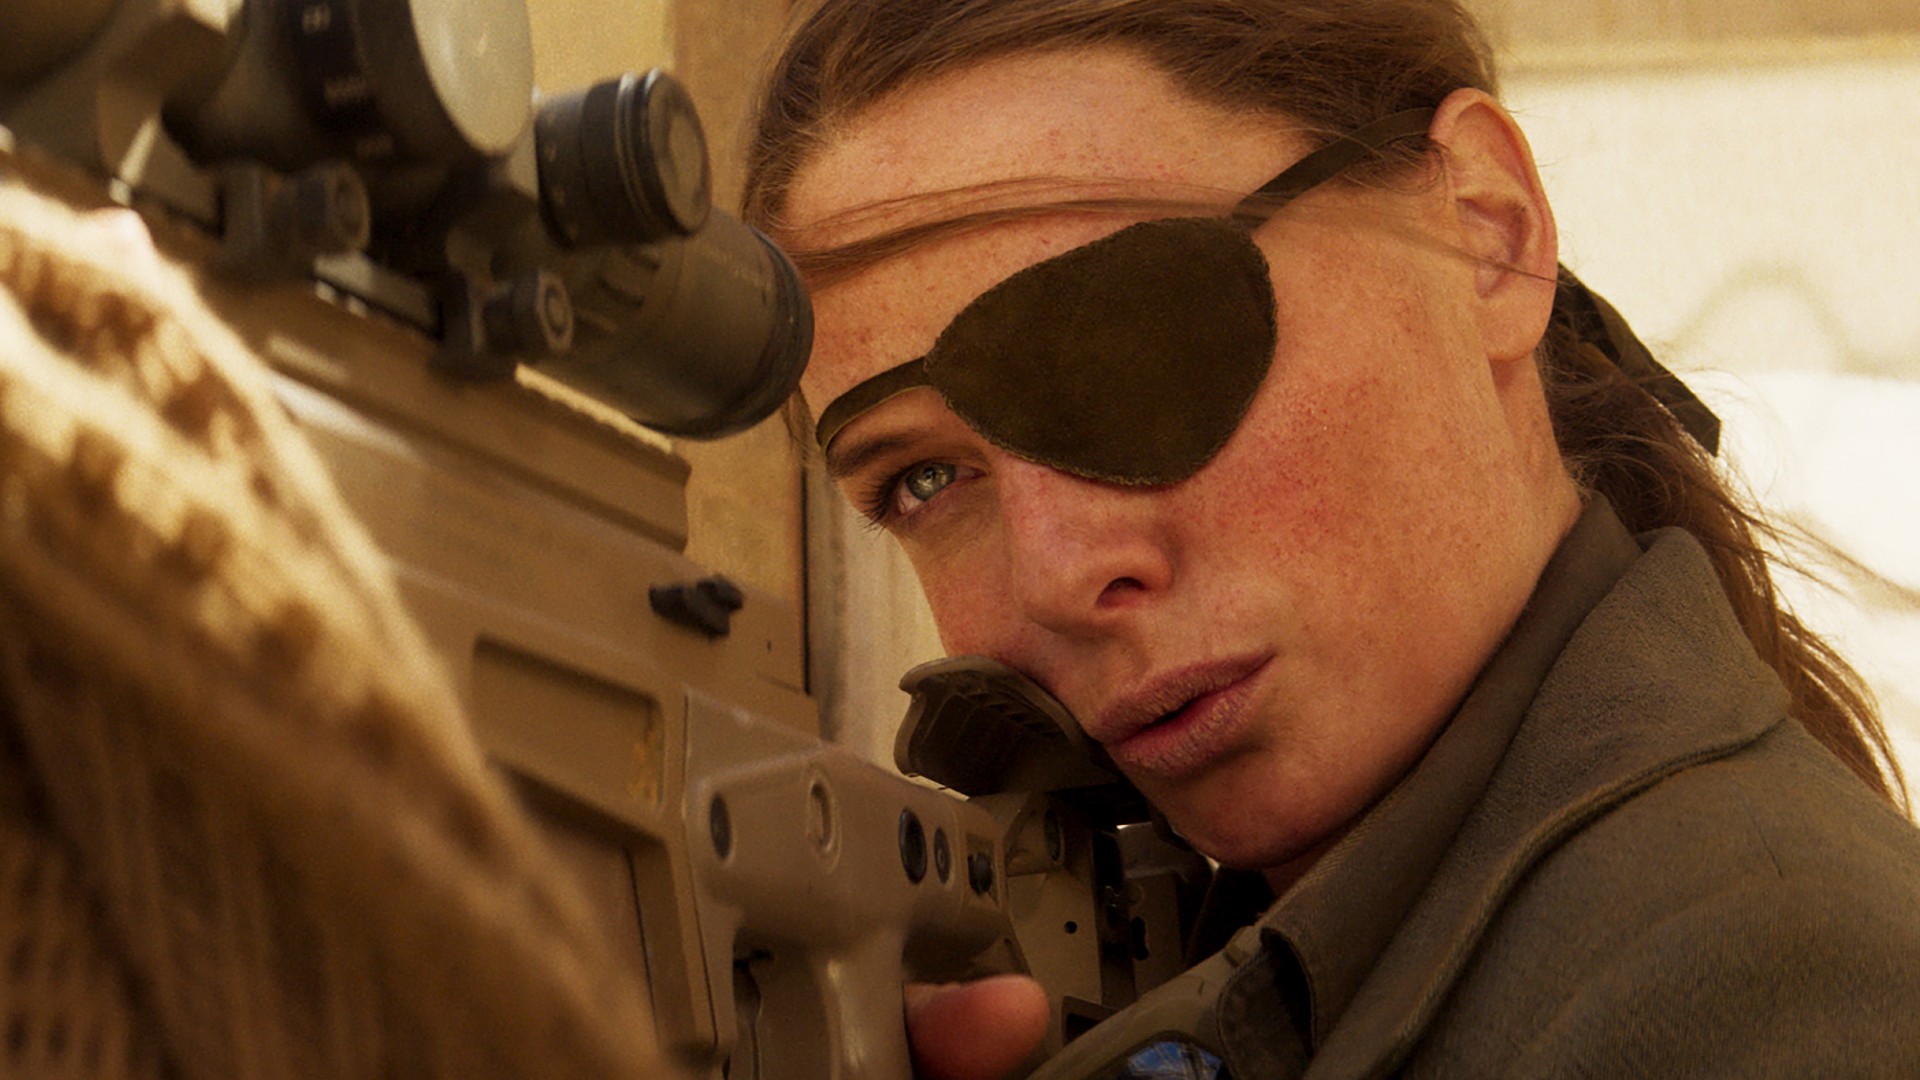 Rebecca Ferguson in an eyepatch traces up a shot alongside with her sniper rifle.